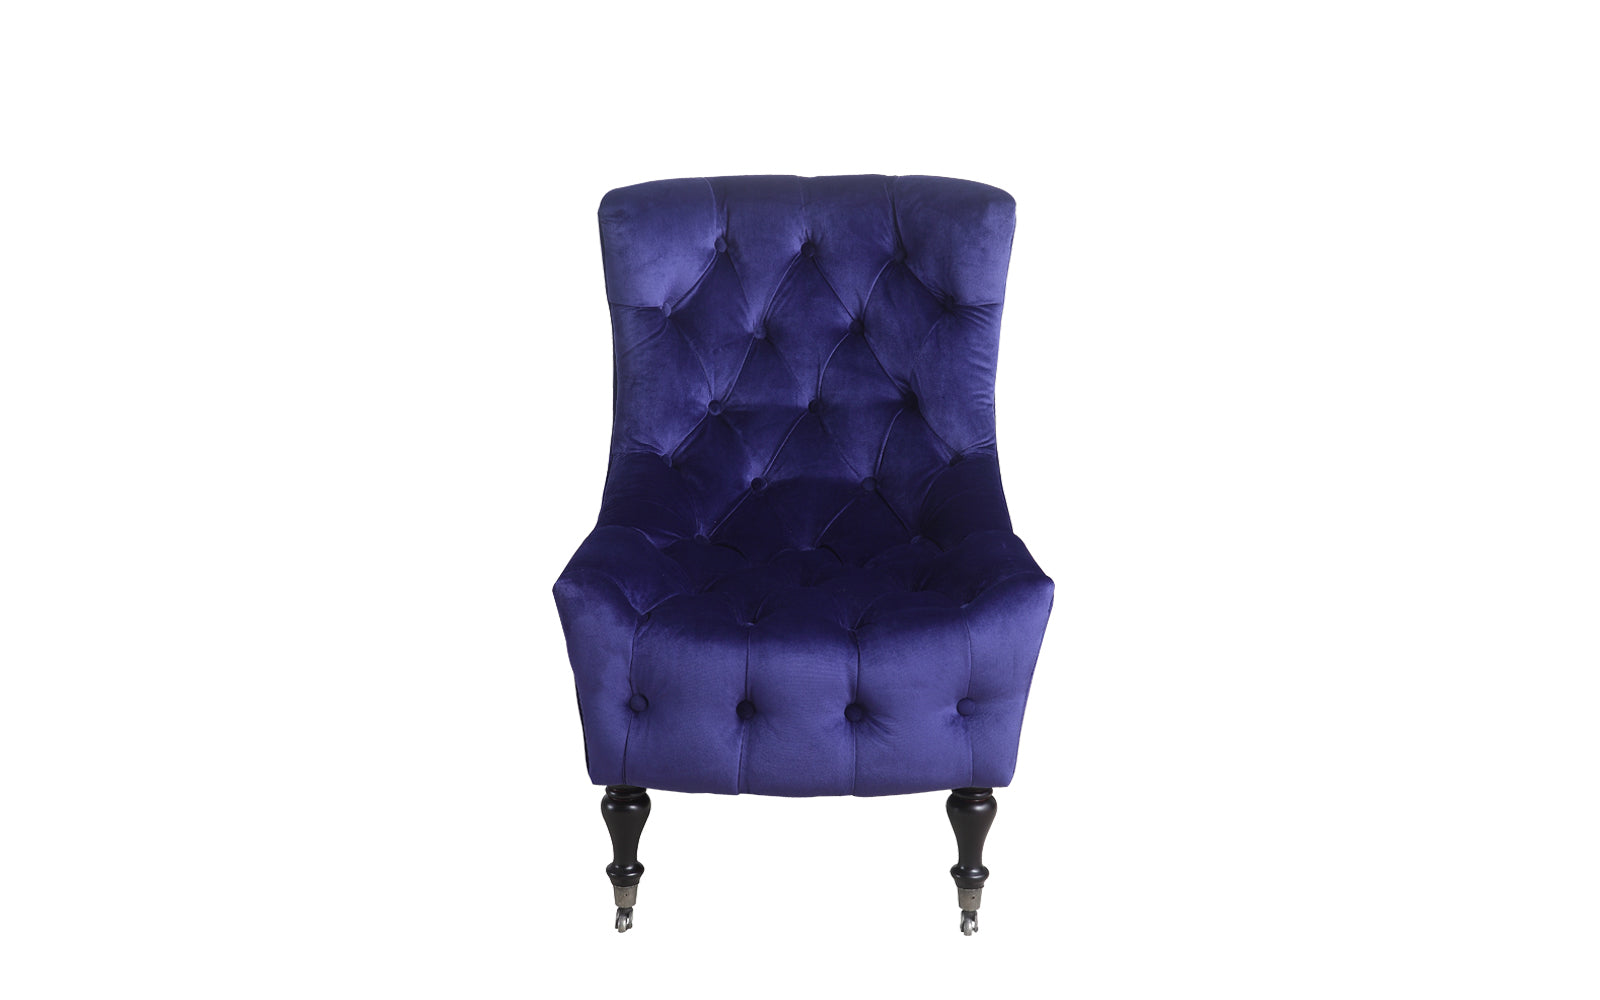 Ennio Classic Tufted Velvet Armchair with Casters